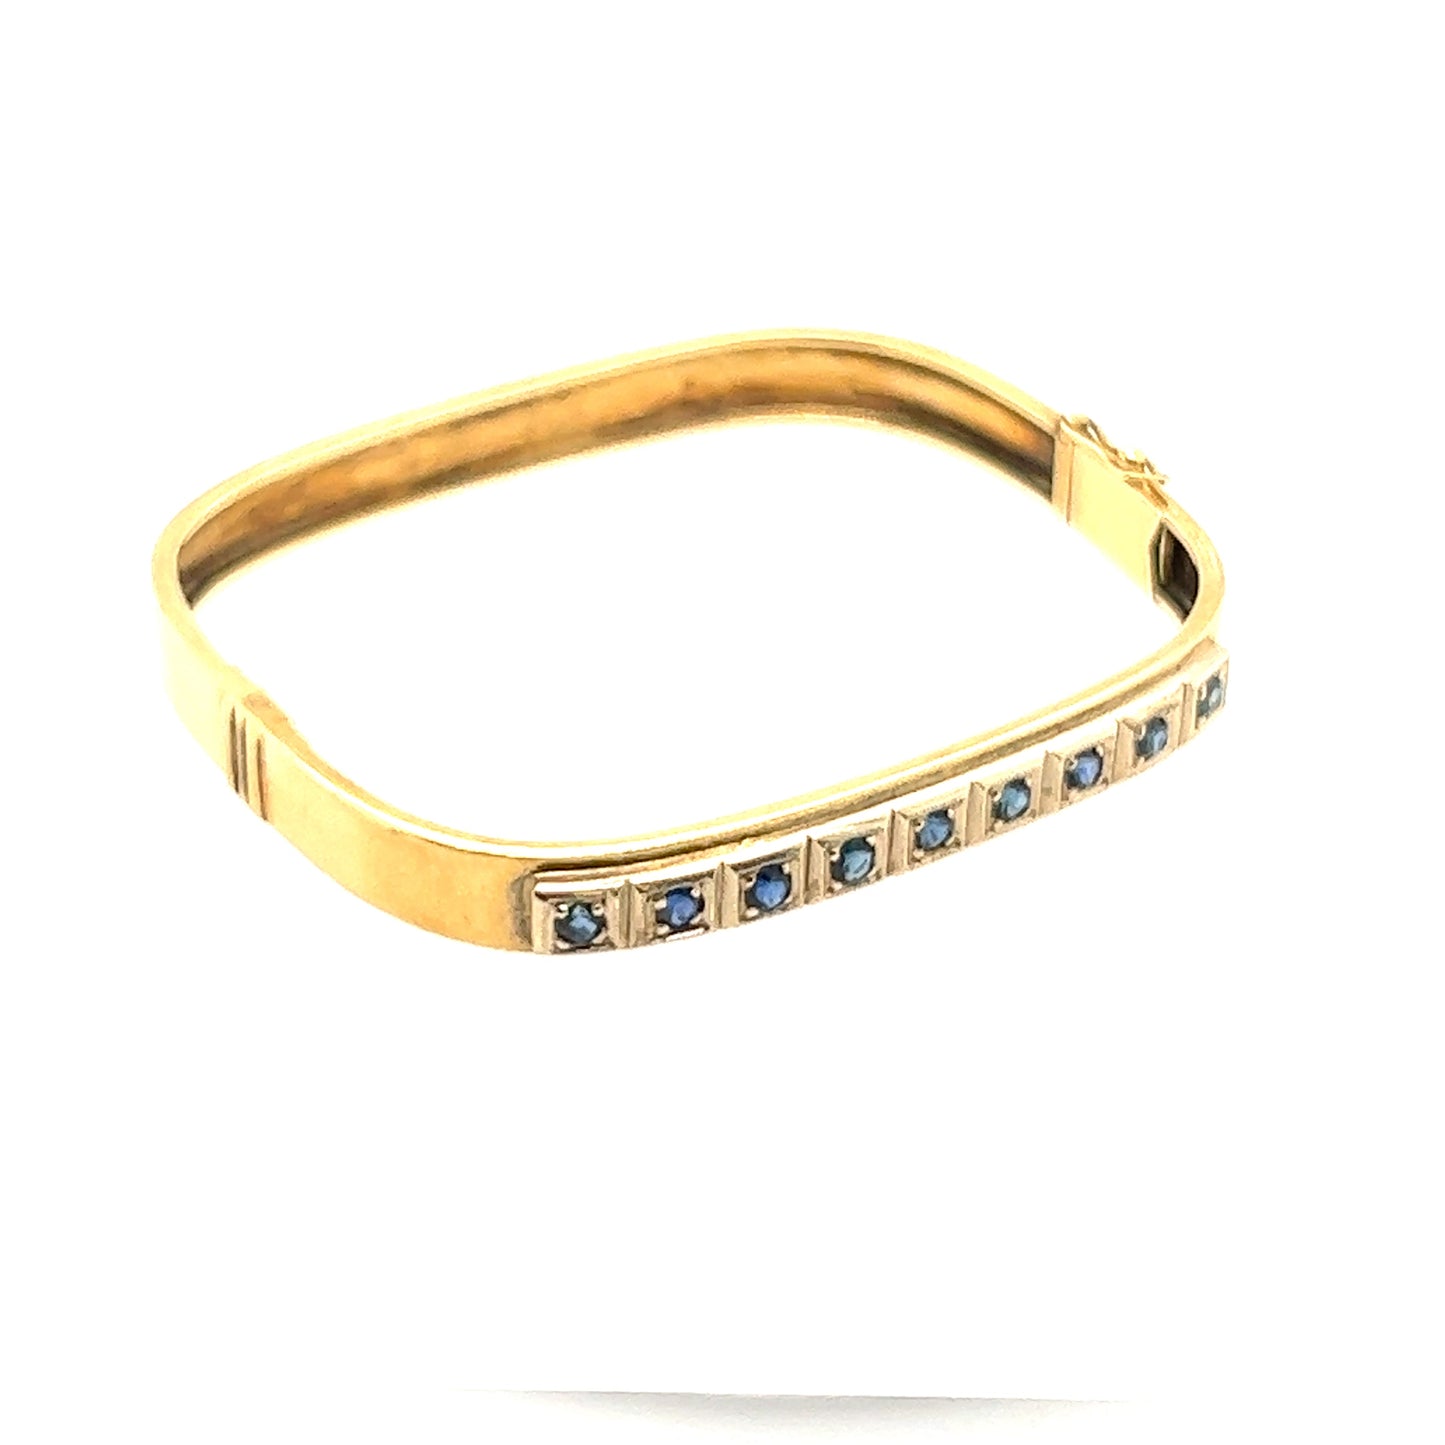 14K Yellow Gold Sapphire Square Bangle Bracelet. Very elegant pice from Italy.